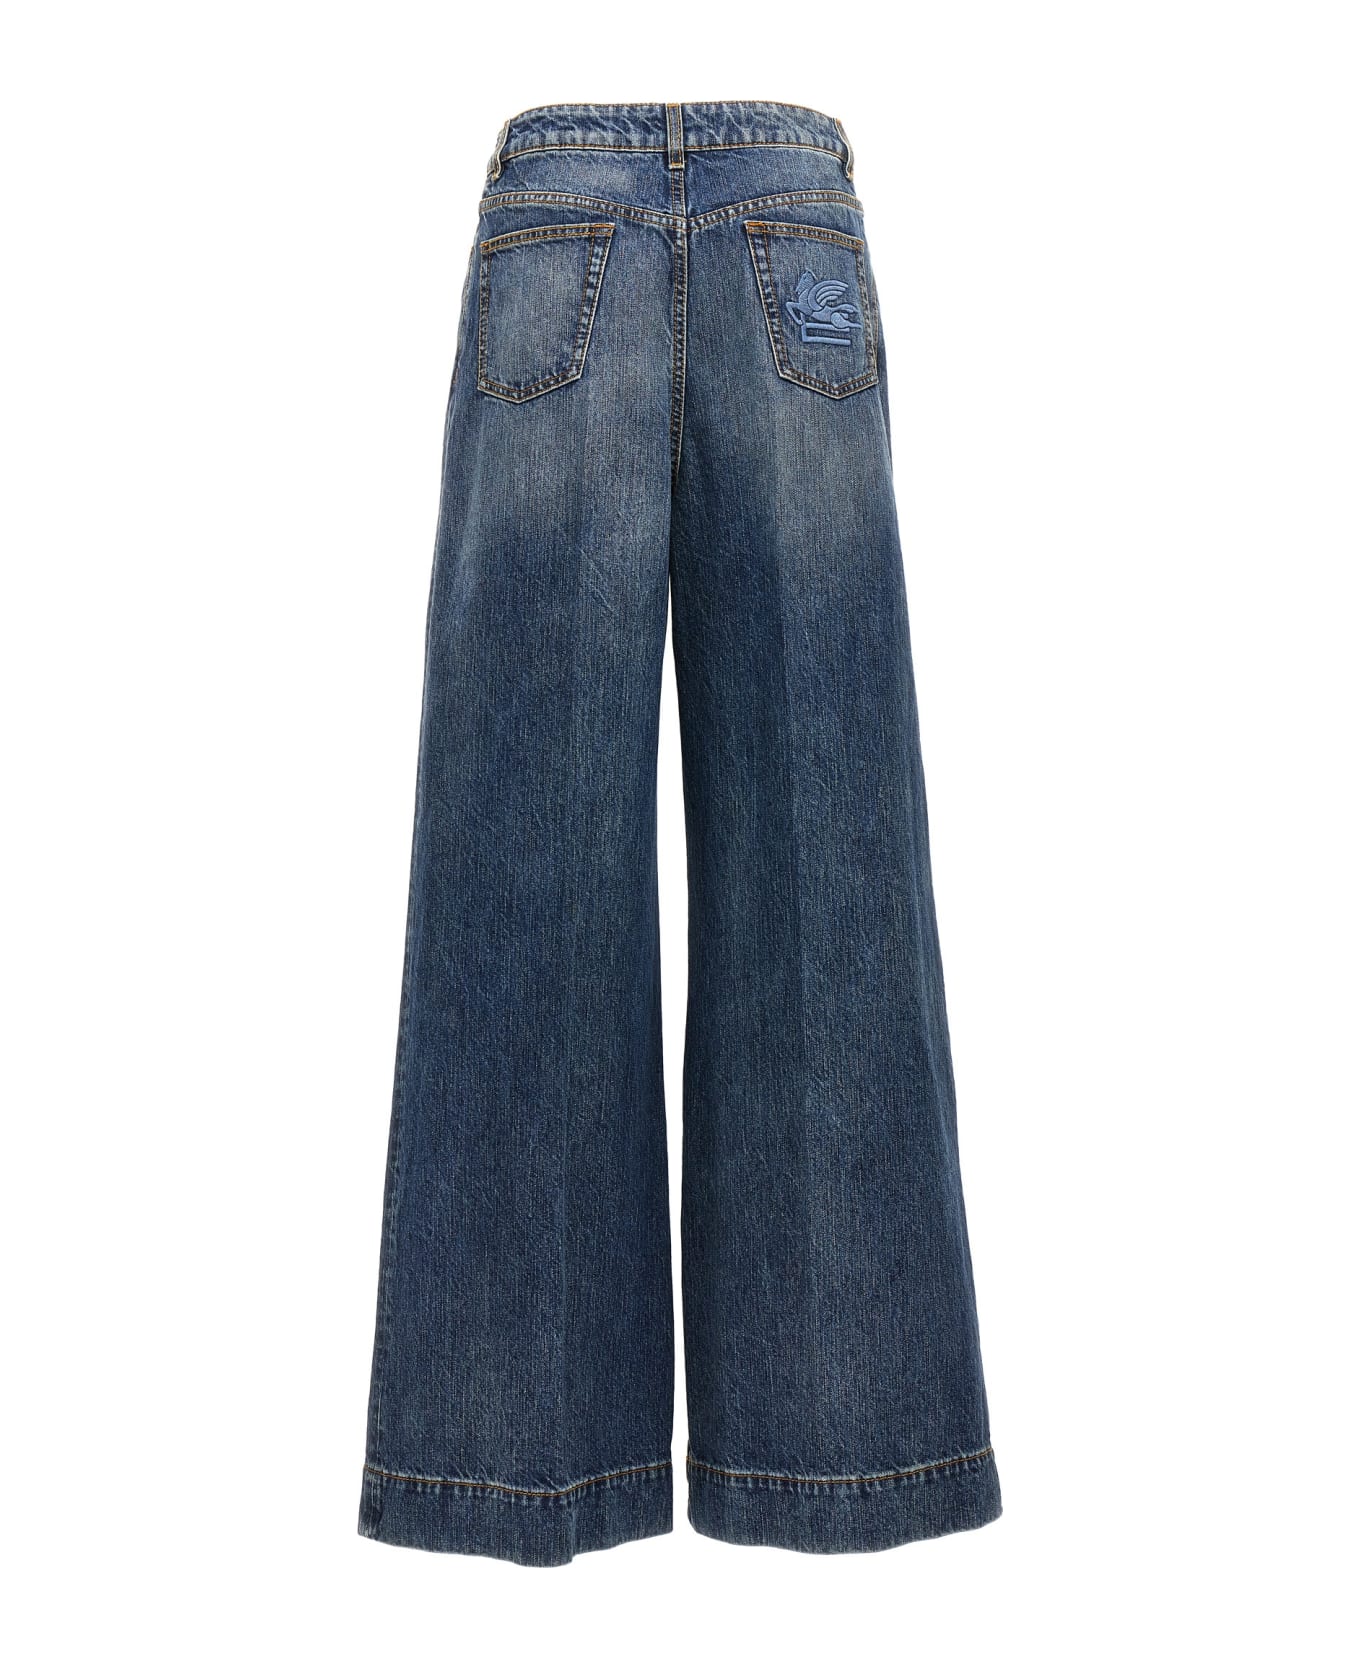 Etro Logo Embroidery Jeans - Blue